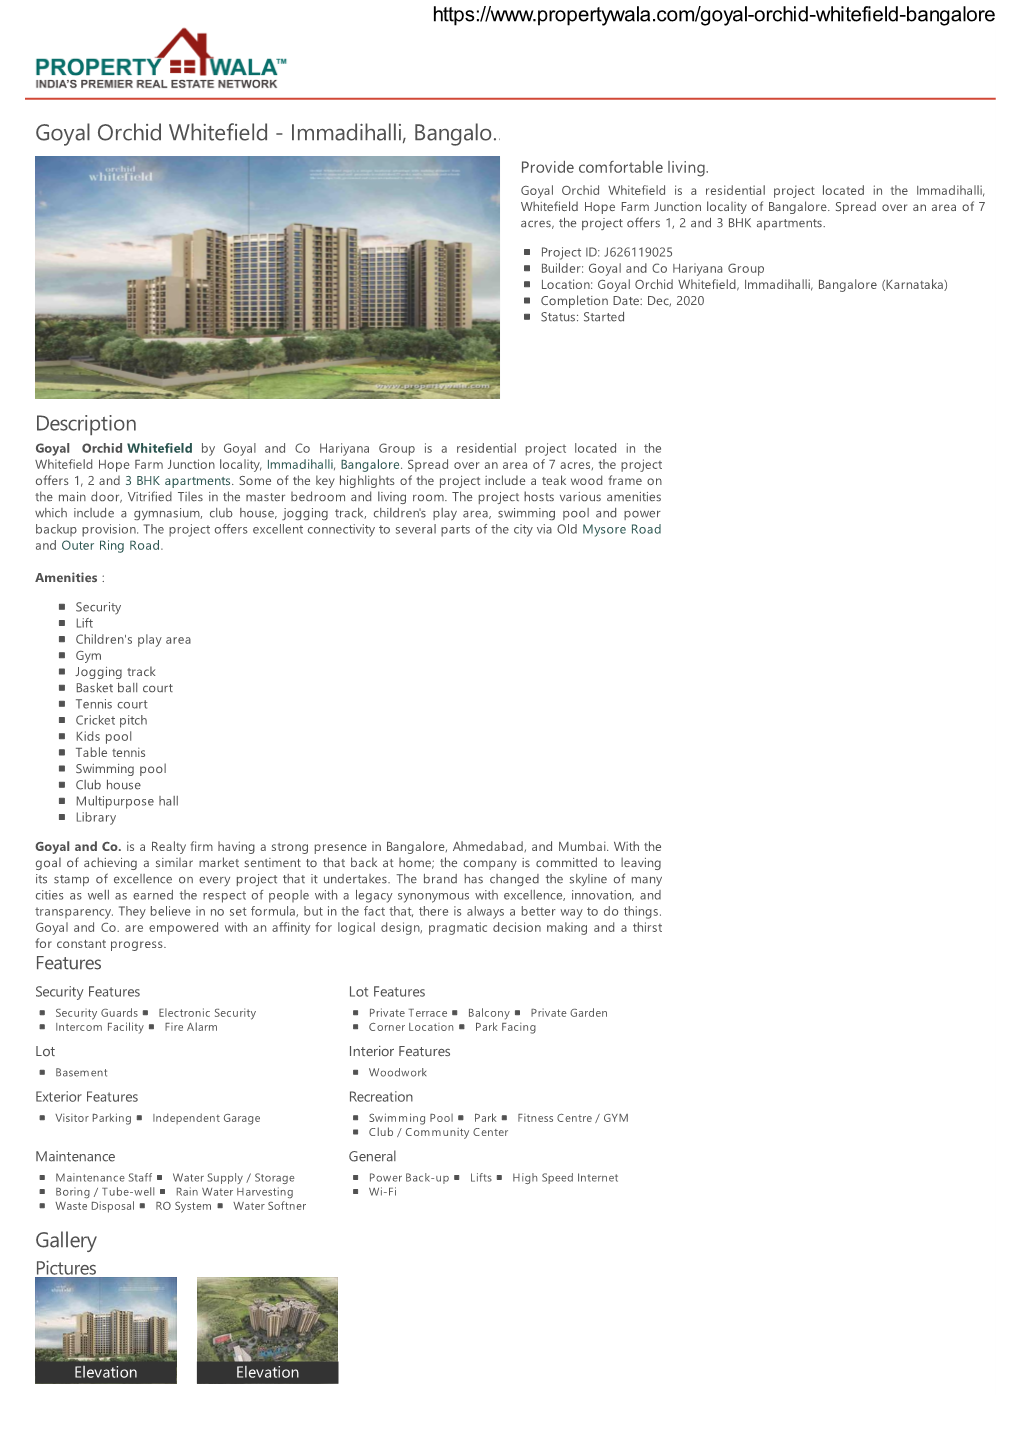 Goyal Orchid Whitefield - Immadihalli, Bangalo… Provide Comfortable Living